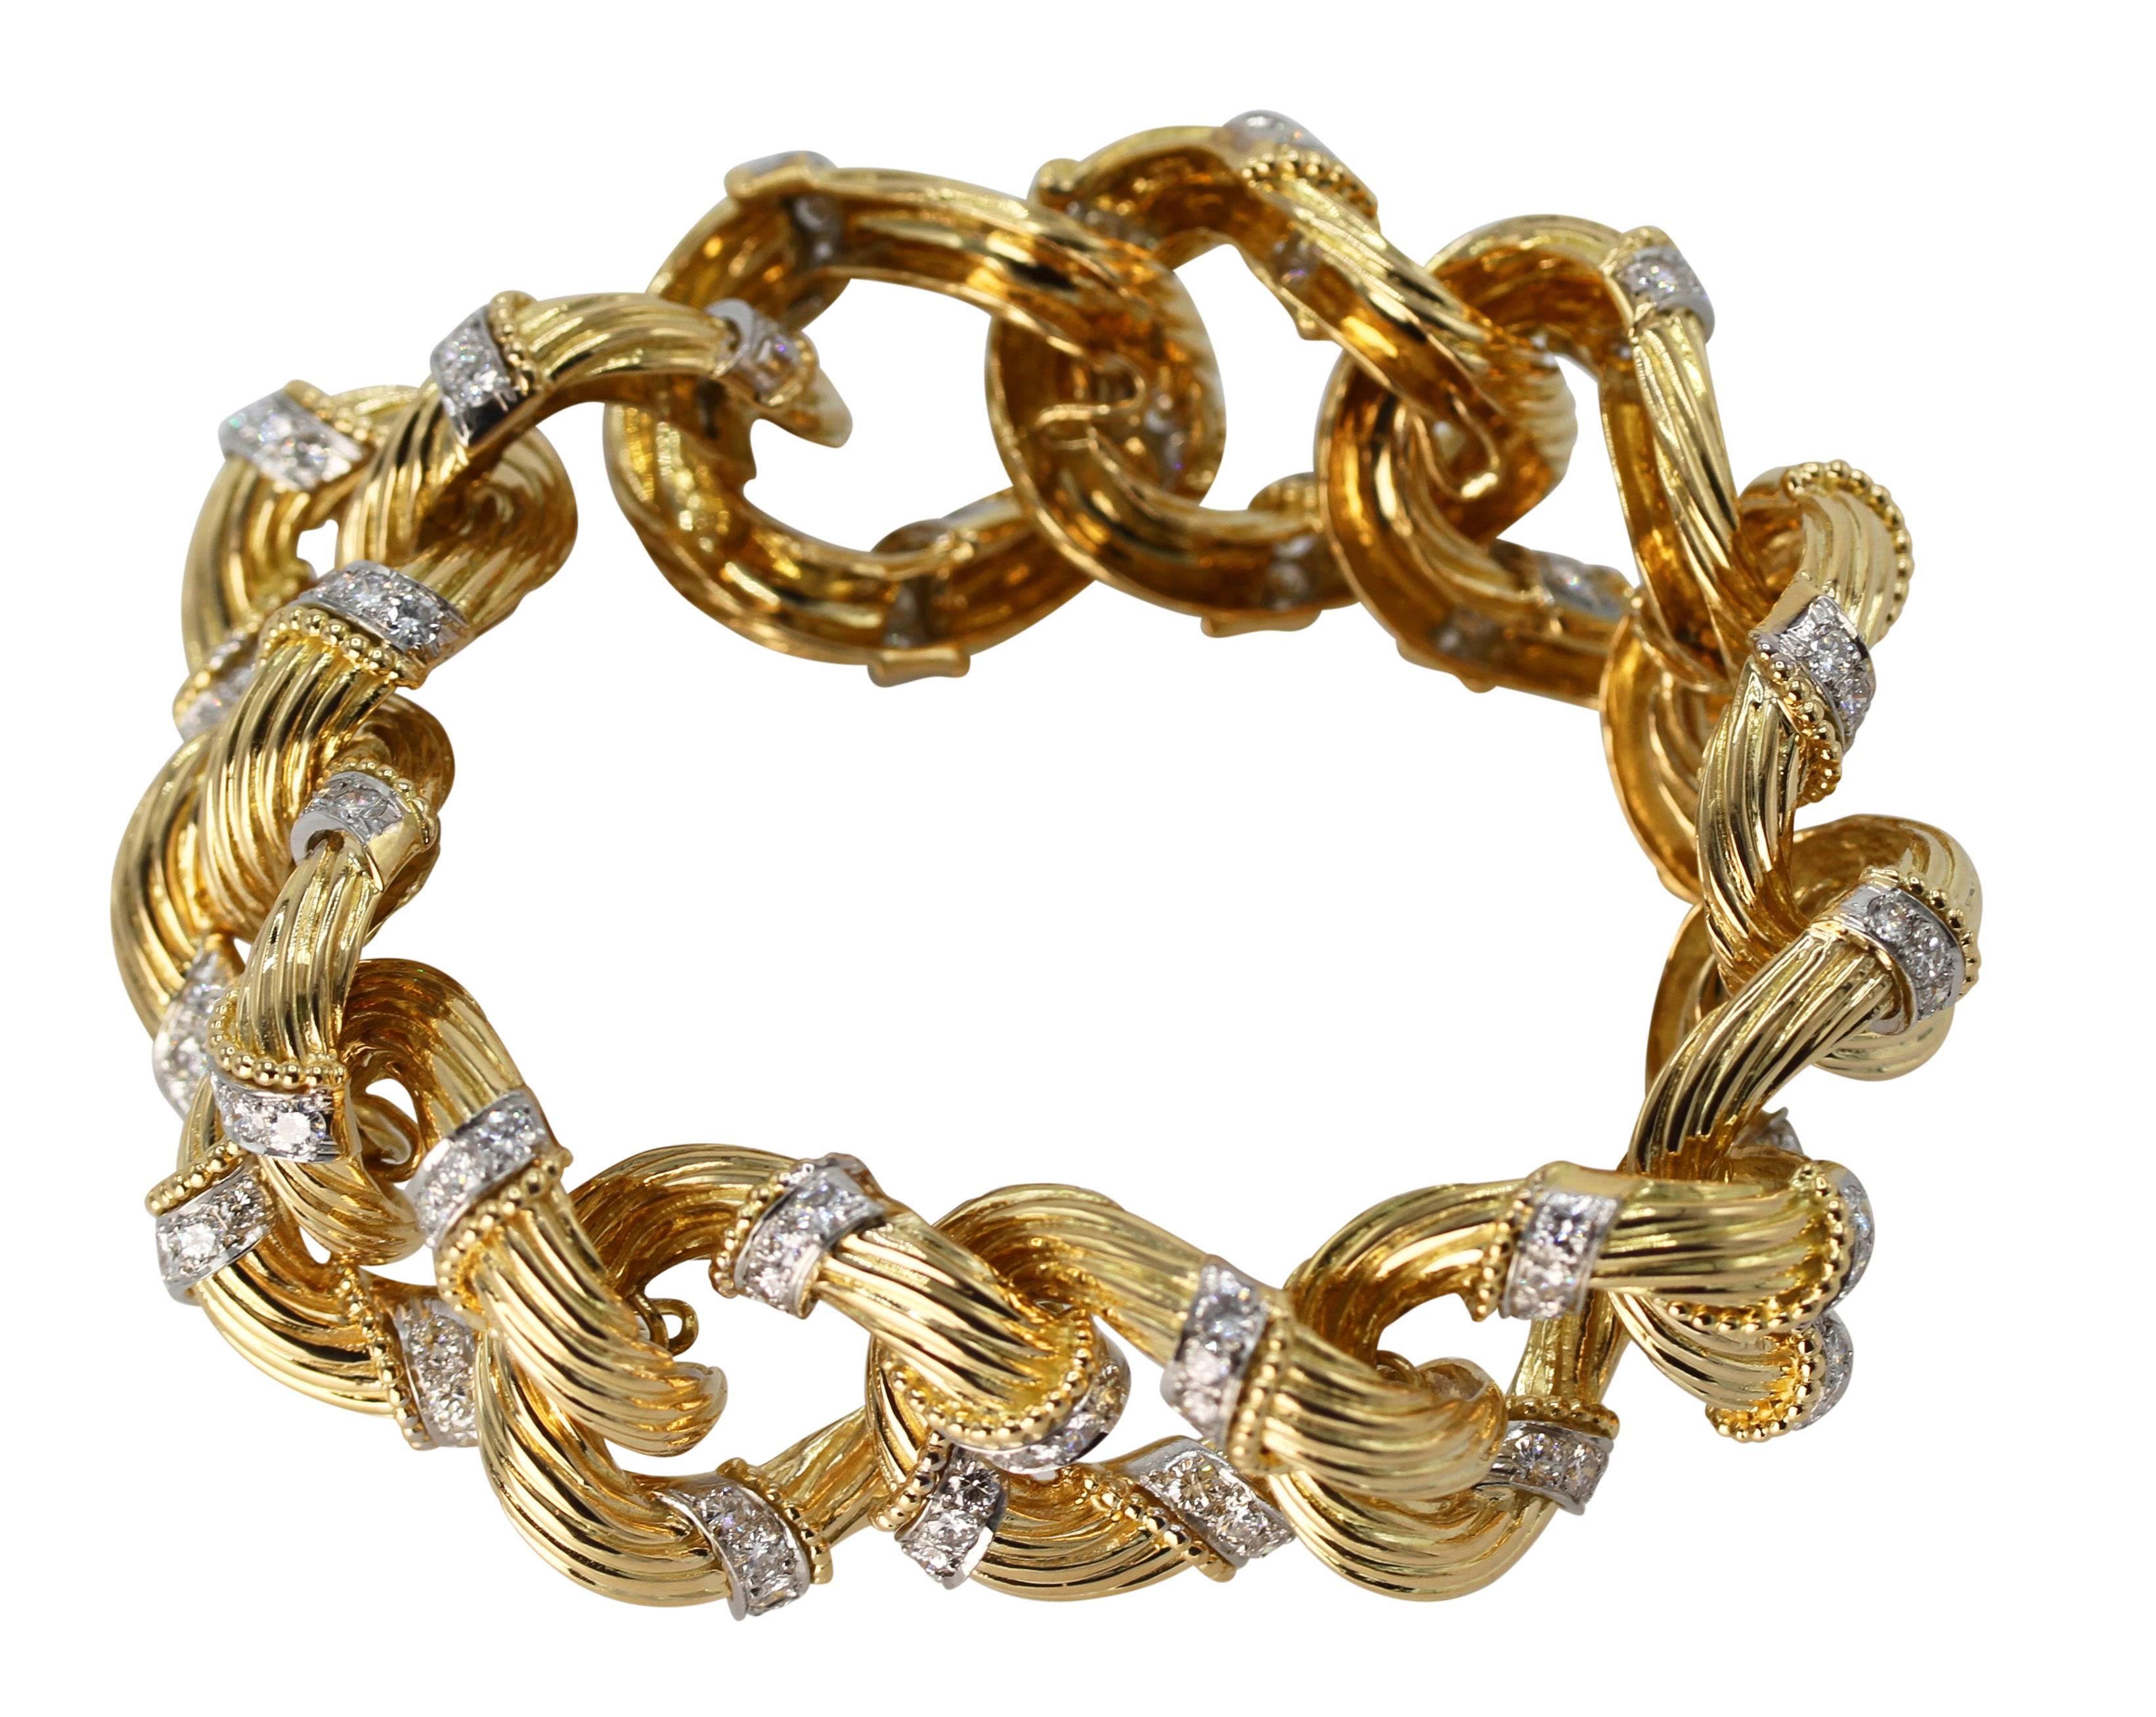 An 18 karat yellow gold, platinum and diamond bracelet by Van Cleef & Arpels, circa 1960, designed as twelve ribbed interlocking curb links accented by 180 round diamonds weighing approximately 10.00 carats, length 8 inches, width 1 inch, gross